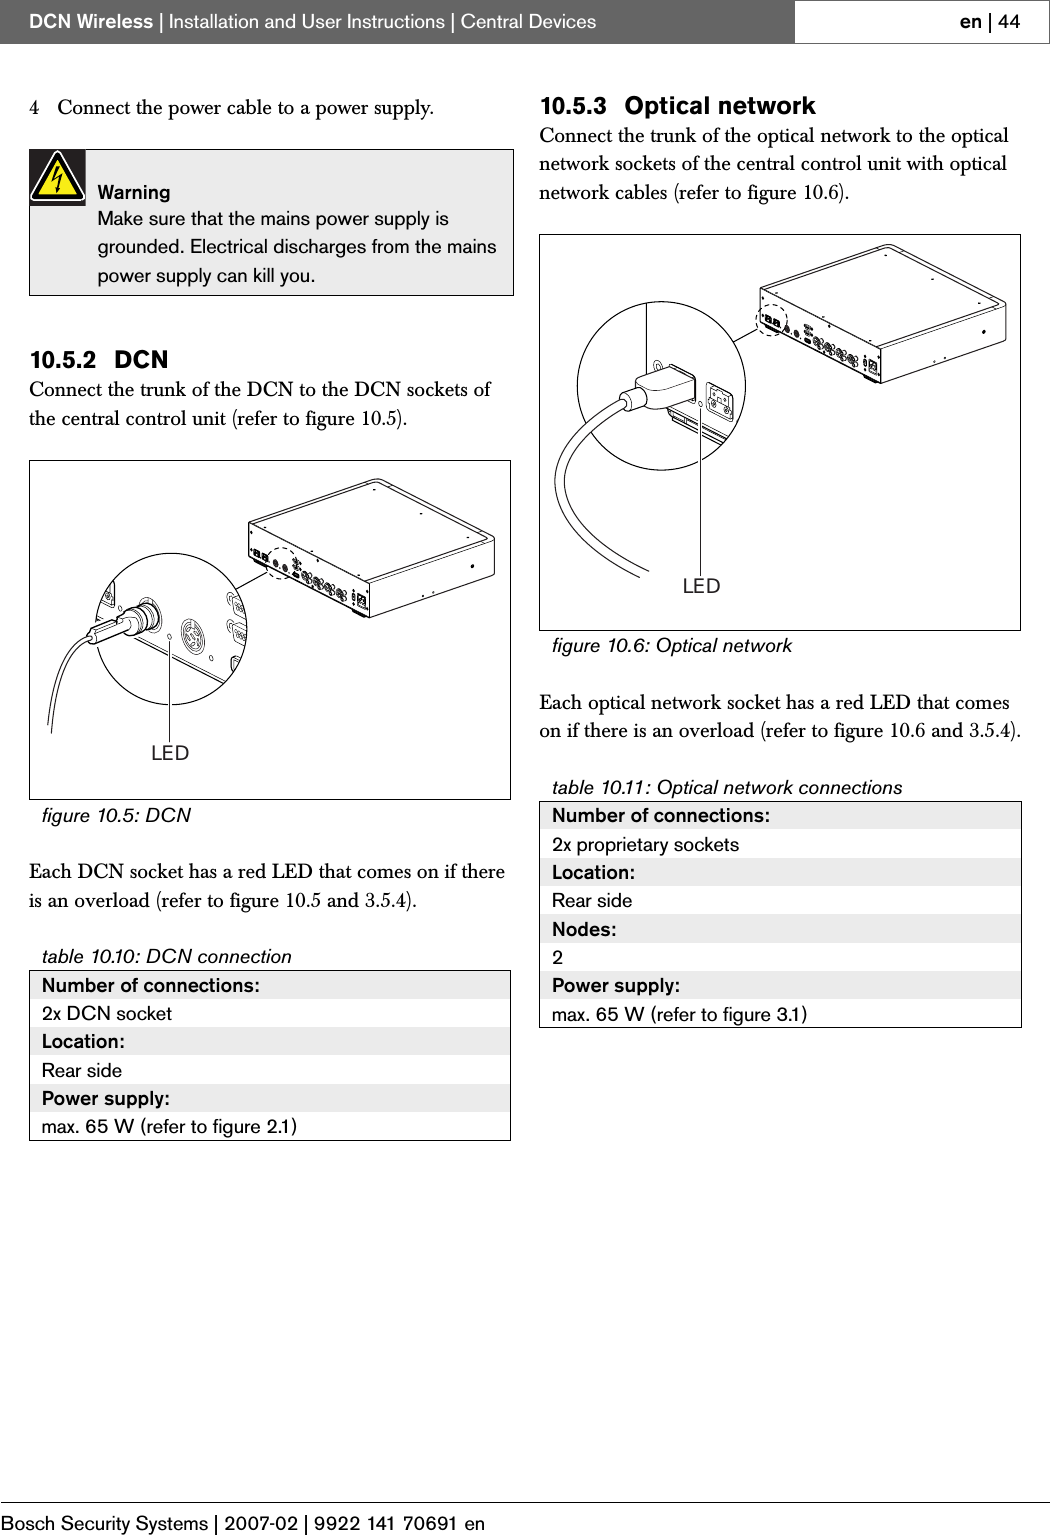 Page 15 of Bosch Security Systems DCNWAP Wireless Access Point User Manual Part 2